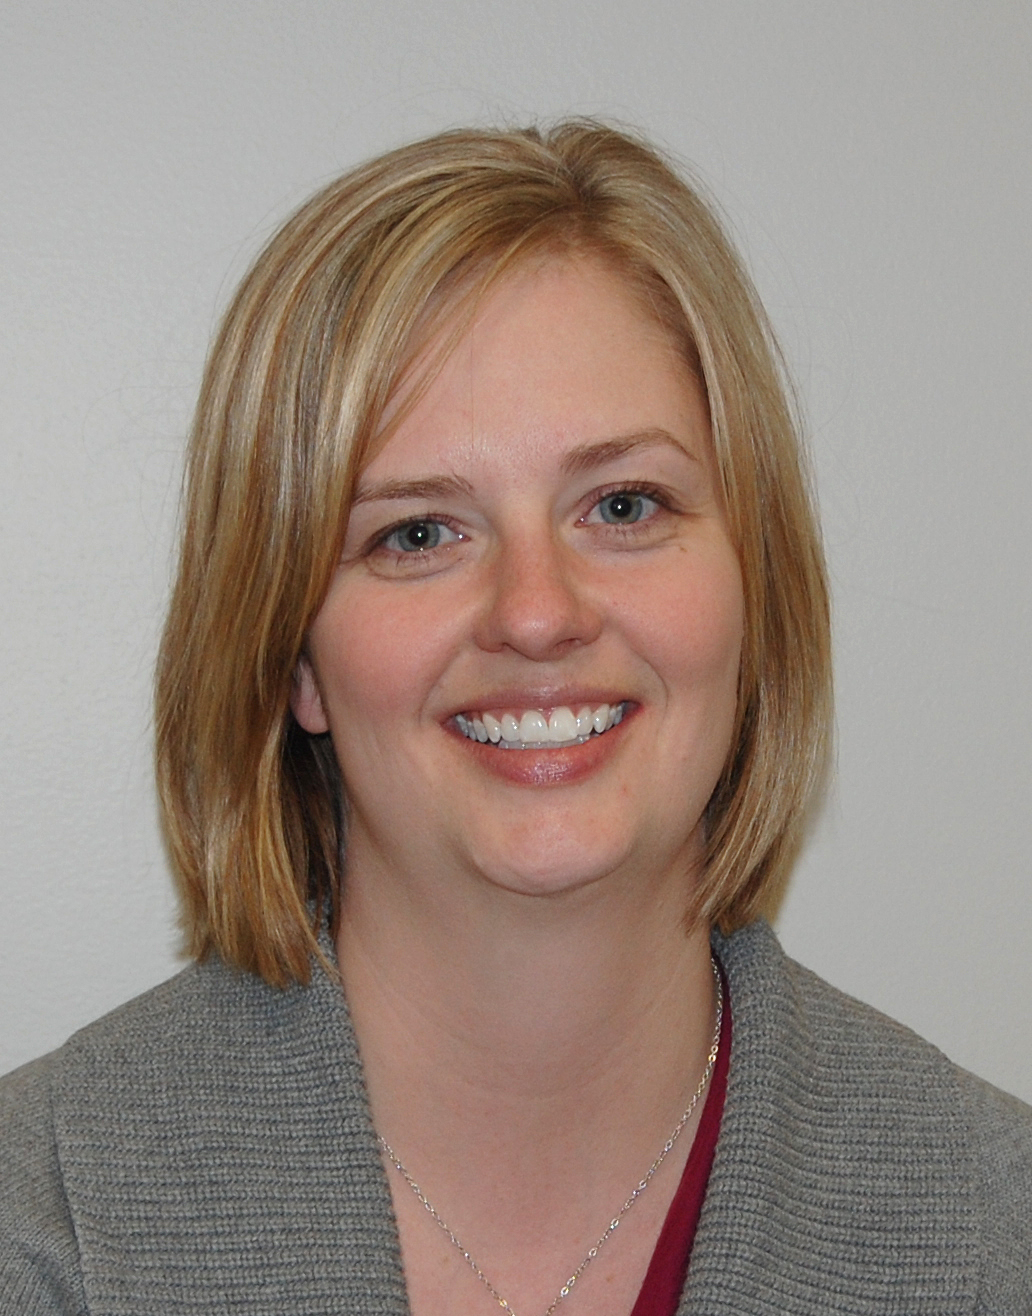 Shana Forster is the new director at NDSU's North Central Research Extension Center near Minot. (NDSU photo)